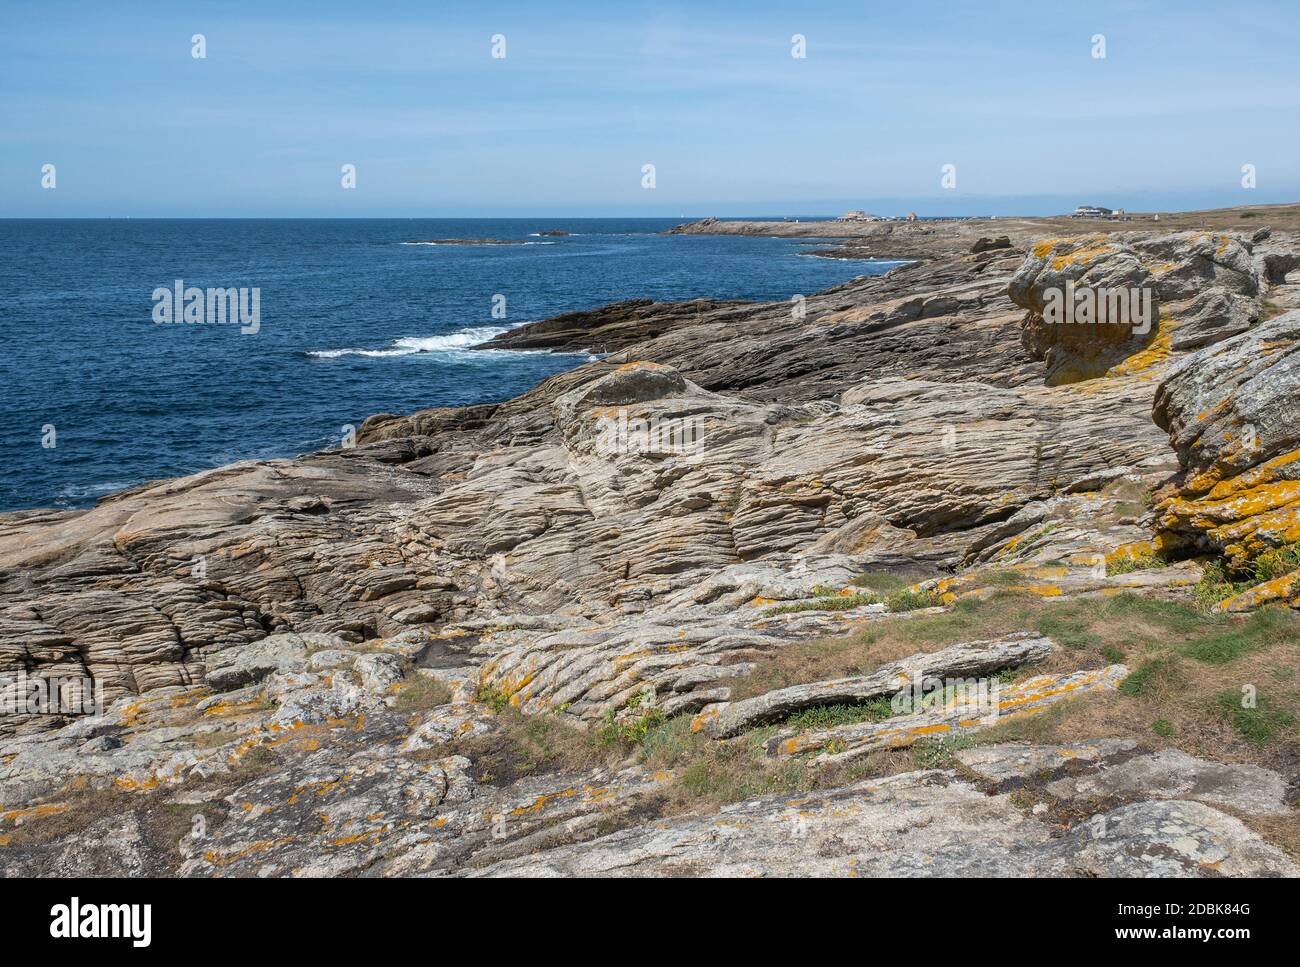 The rugged coastline and rocks at The Cote Sauvage on The Quiberon Peninsula, Brittany, France. Stock Photo